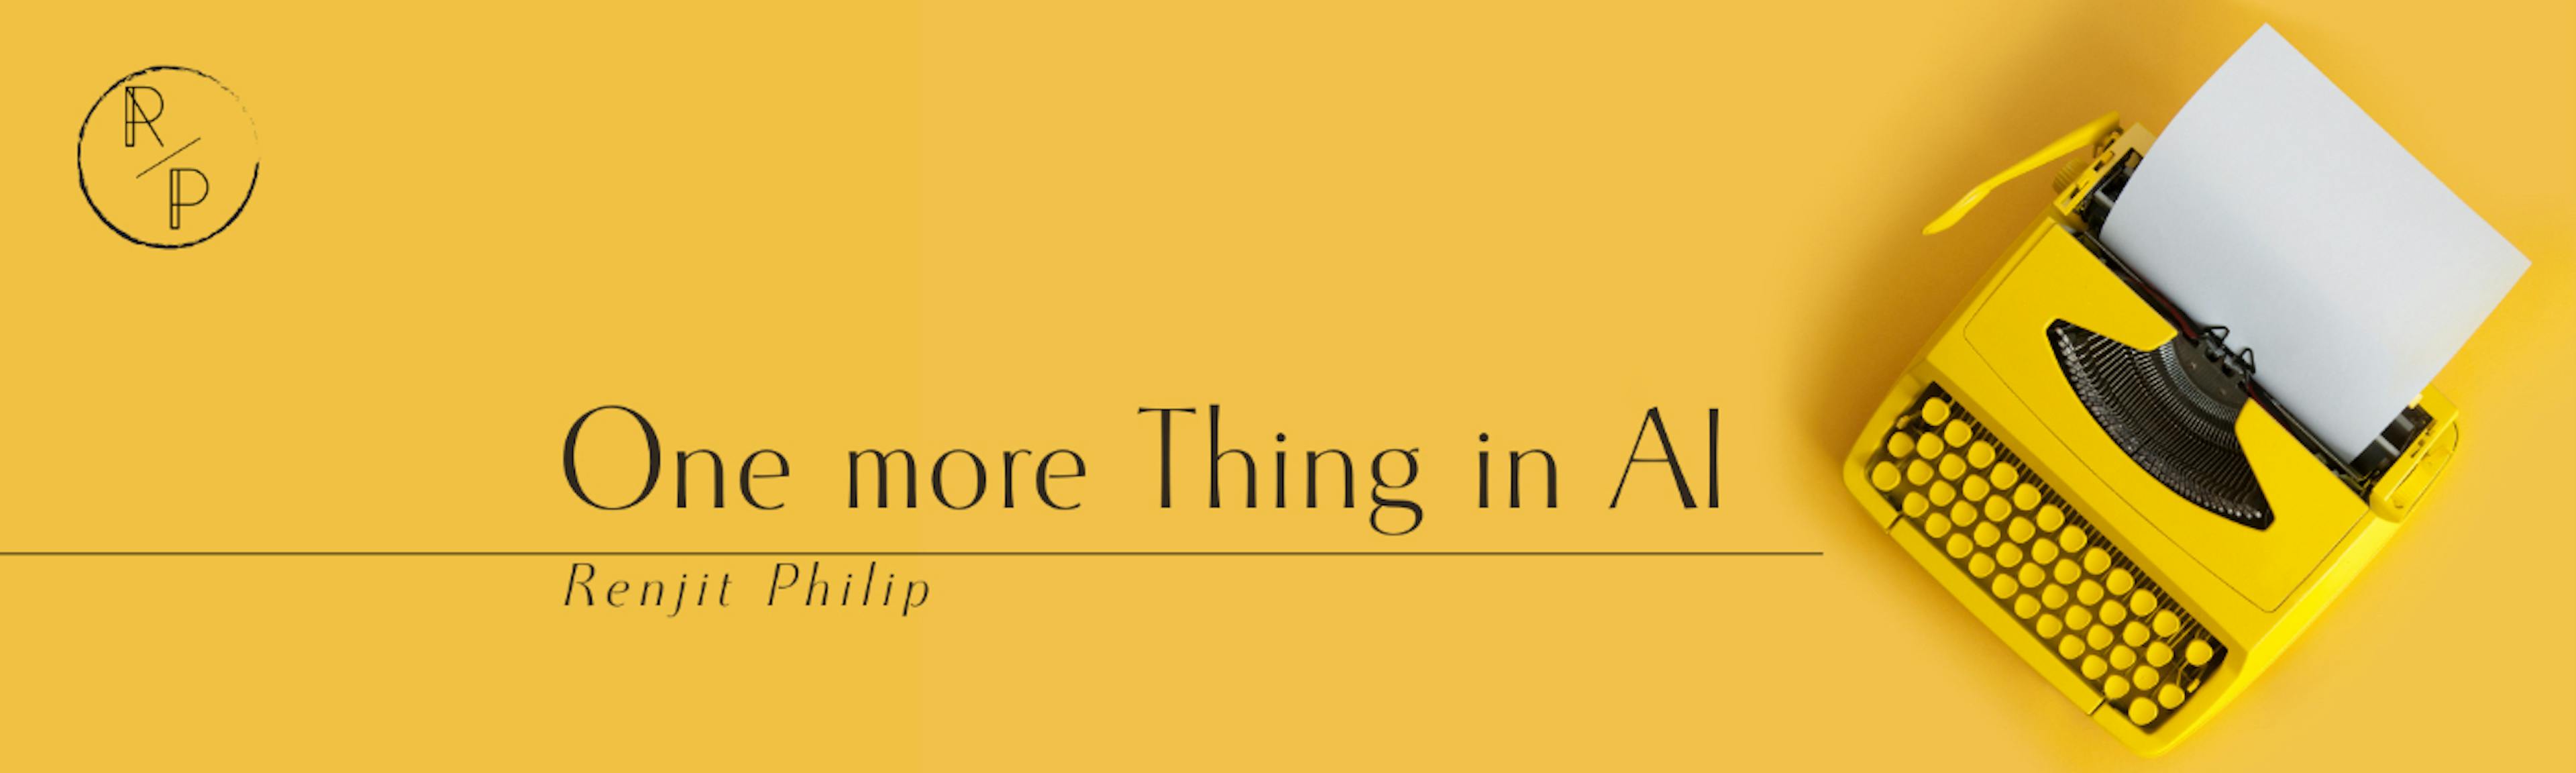 featured image - #19: Latest Edition of One More Thing in AI Newsletter